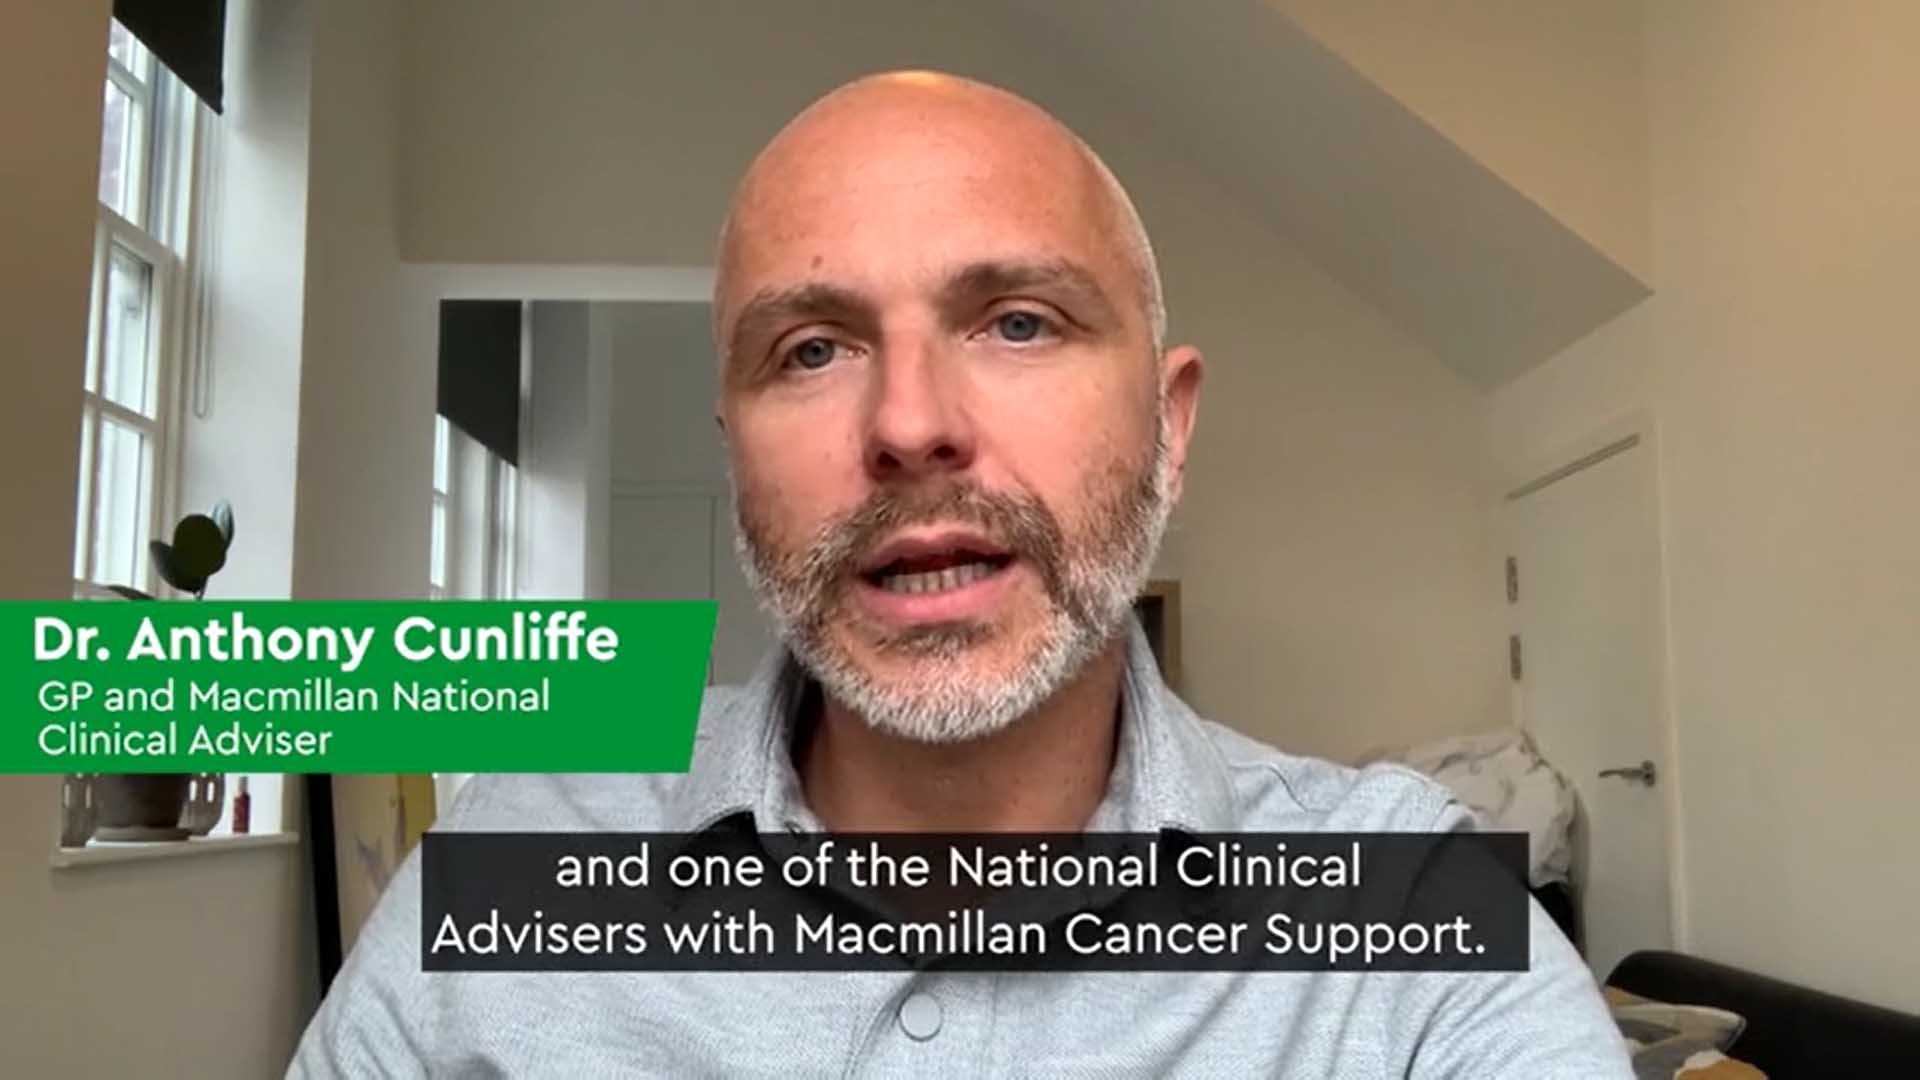 Watch the video to hear Anthony Cunliffe, GP and Macmillan Clinical Adviser, talking about the new referral process to the Macmillan Support Line and how the service can benefit your patients.